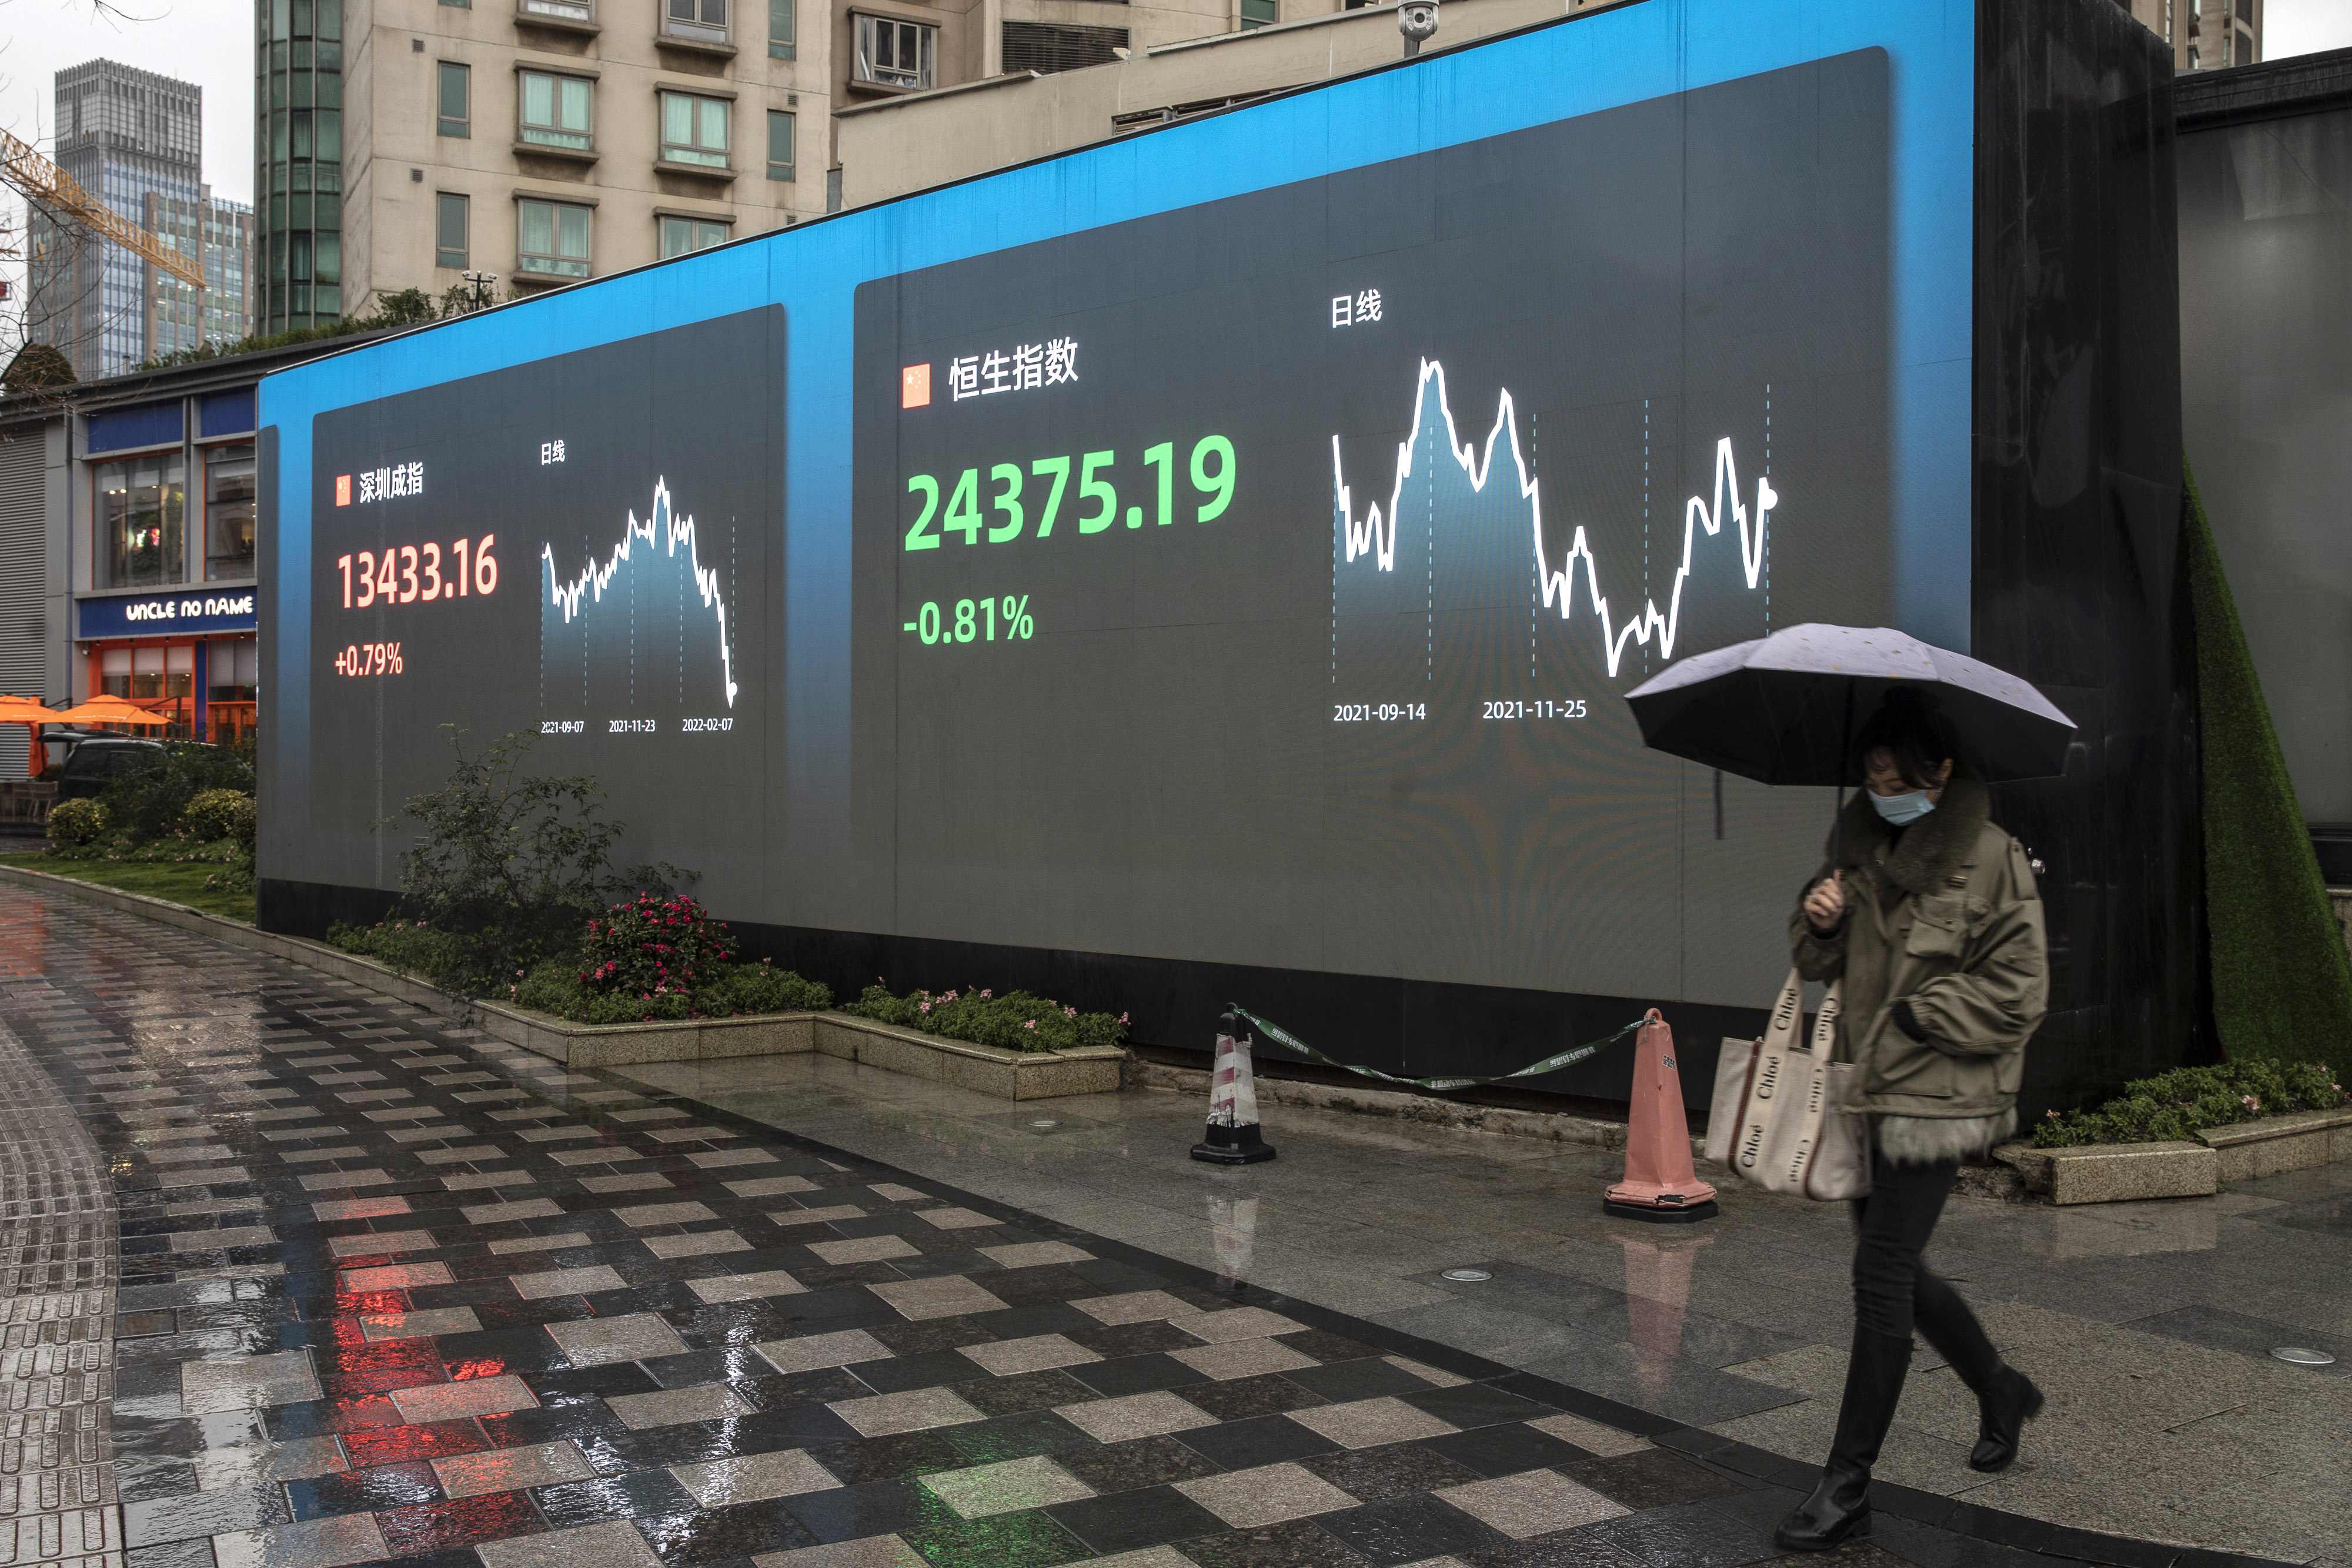 A public screen displays the Shenzhen and Hang Seng stock Indexes on February 7. Persistently high valuations of stocks and the prospect of rising interest rates offer opportunities for investors looking at the bond market. Photo: Bloomberg